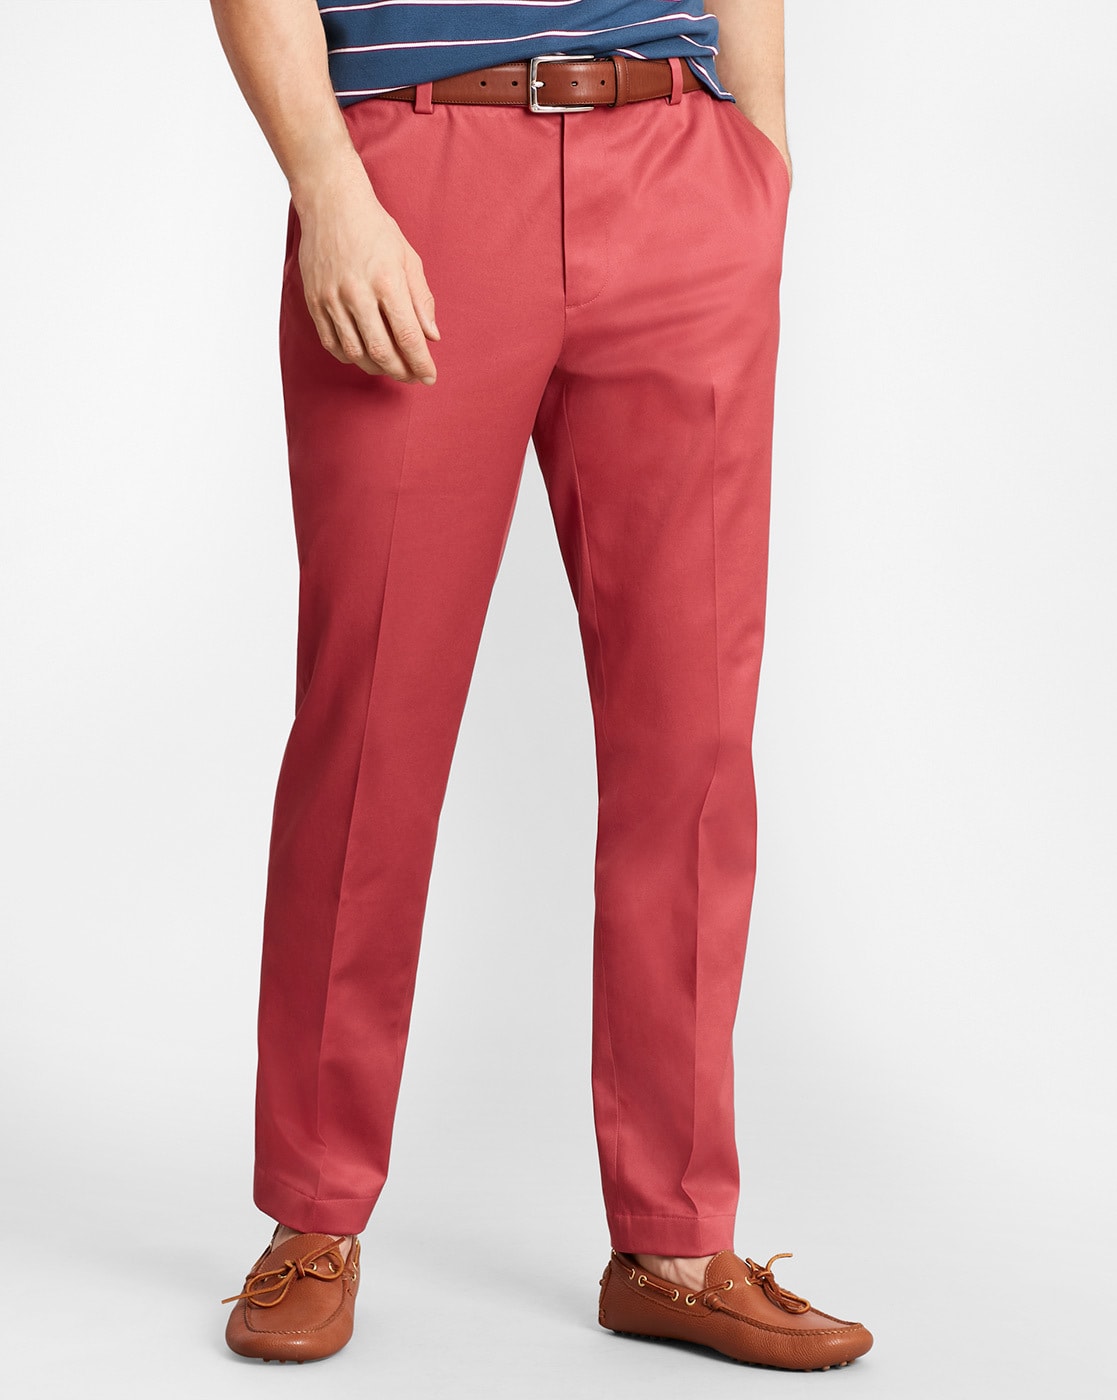 Rustic Red Stretch Cotton Chinos  Hamercop